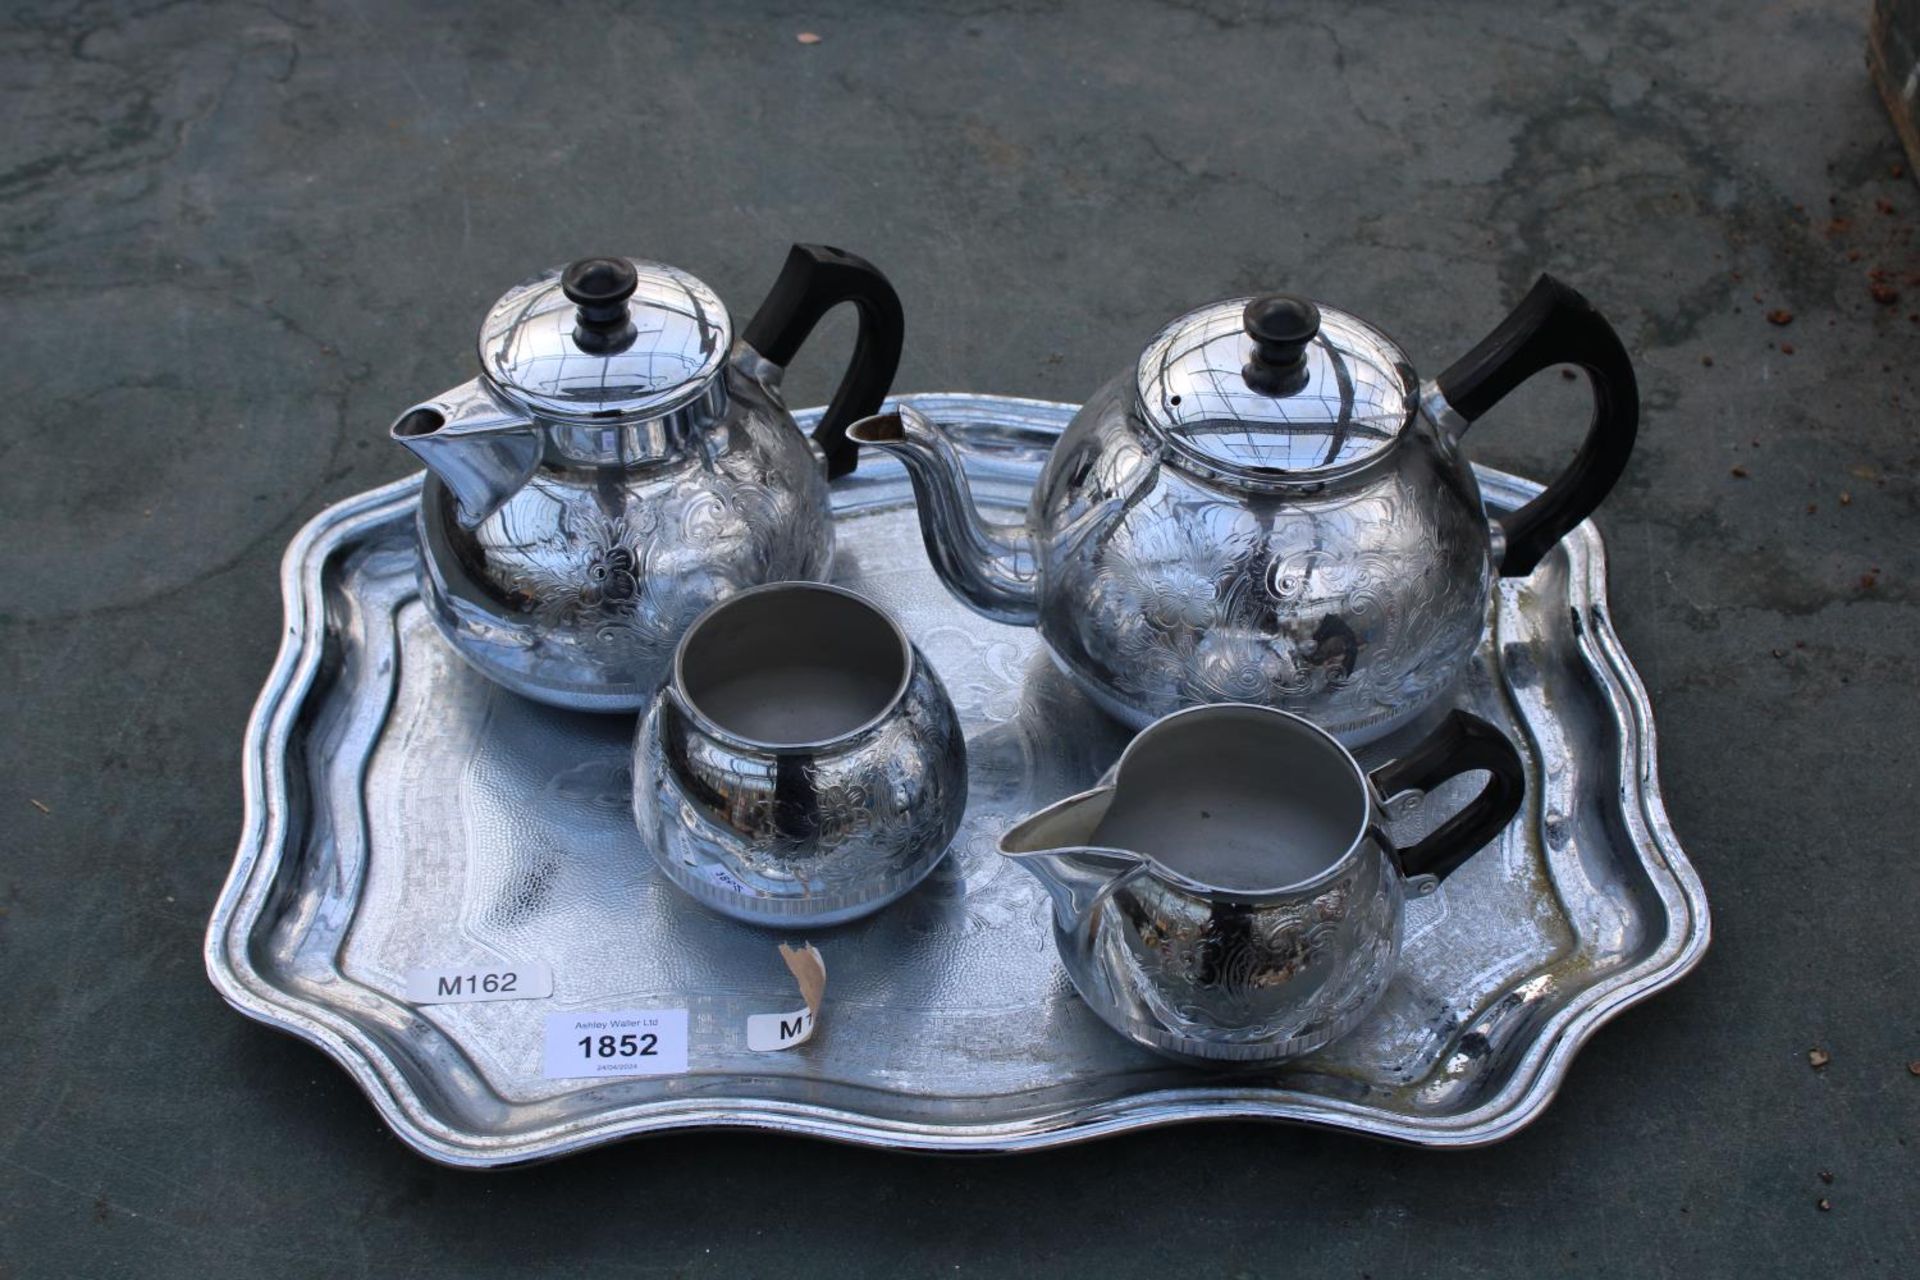 A METALWARE TRAY AND A TEA SERVICE COMPRISING OF TWO TEAPOTS, SUGAR BOWL AND JUG